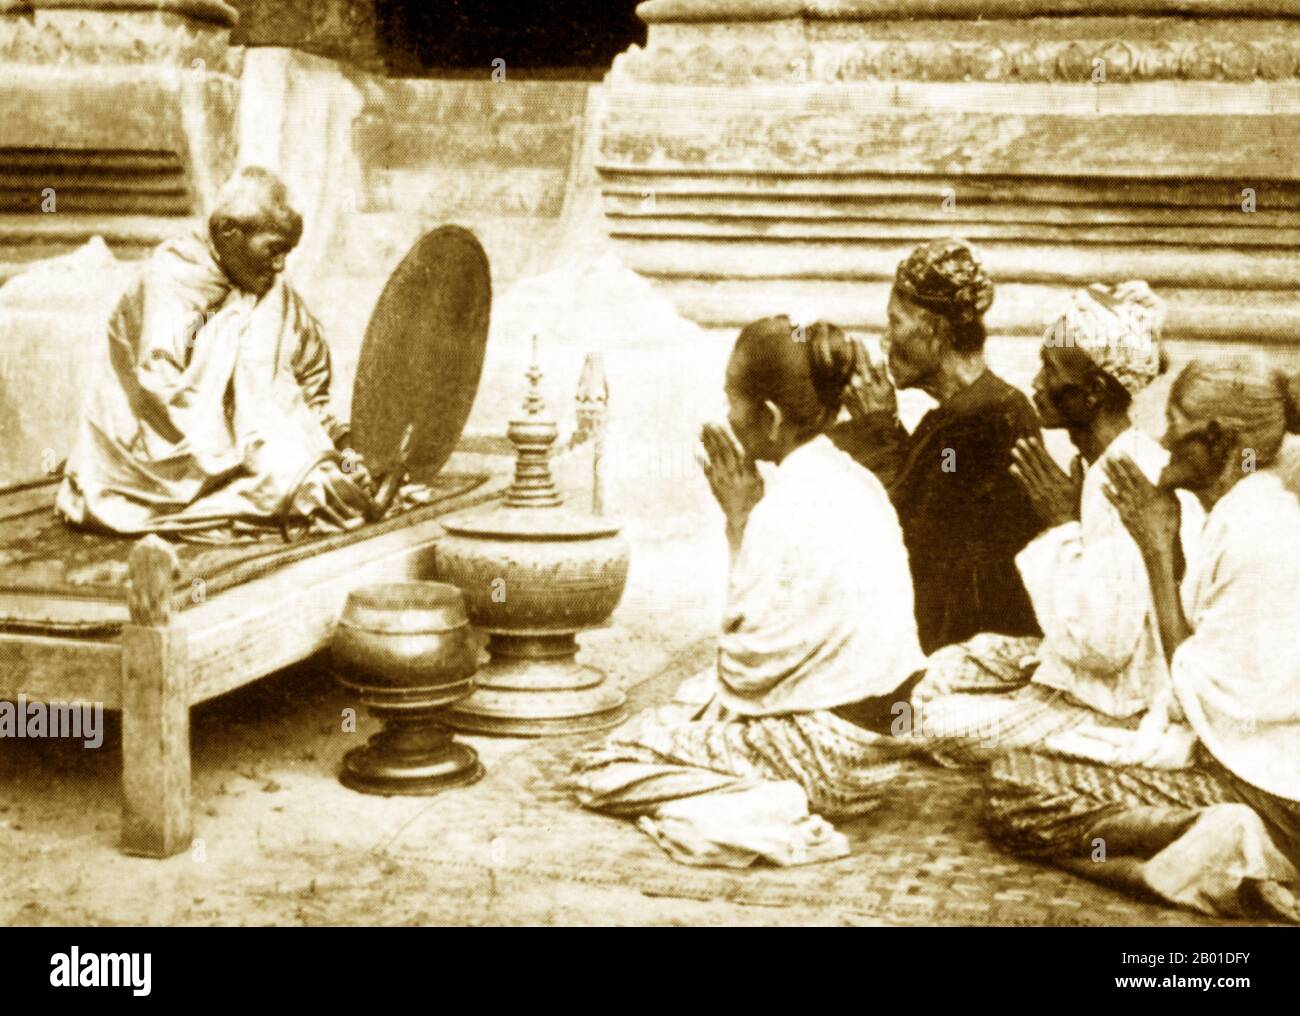 Burma: A Buddhist abbot (Burmese: 'sayadaw') recites precepts to devotees, c. 1892-1896.  Buddhist monks collect alms - food prepared by devotees and laypersons who make merit by donating it - every morning in Burma and most Theravada Buddhist countries. This is their only food for the day. Monks do not eat after 12 noon.  Legend attributes the first Buddhist doctrine in Burma to 228 BC when Sonna and Uttara, two ambassadors of the Emperor Ashoka the Great of India, came to the country with sacred texts. However, the golden era of Buddhism truly began in the 11th century. Stock Photo